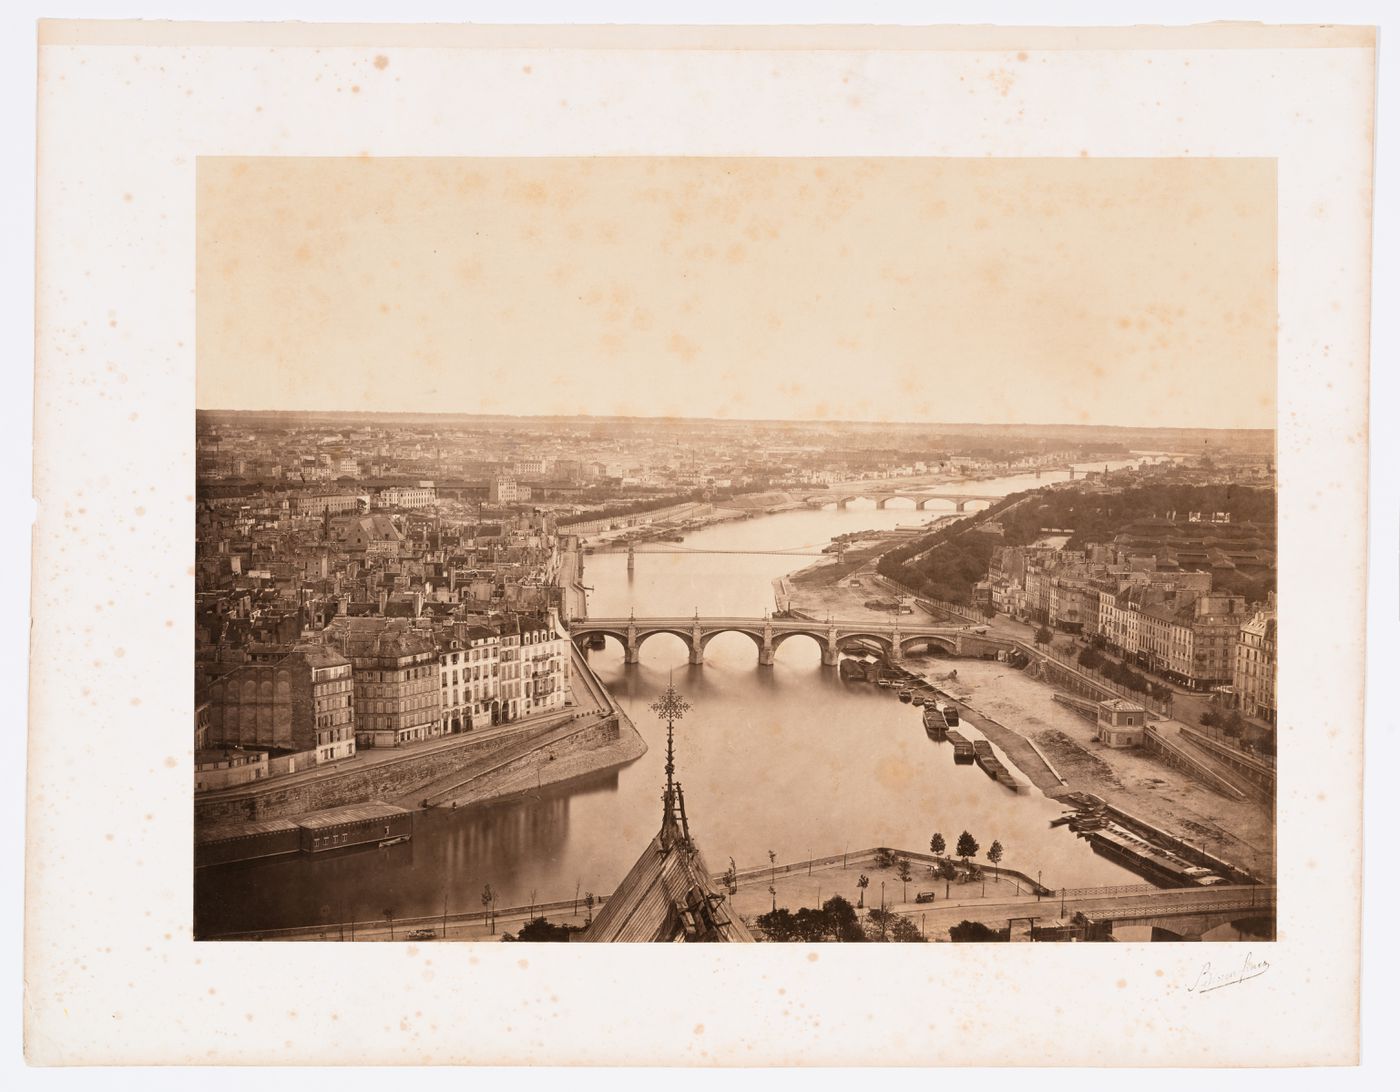 Over-view of Seine river and city, from the Cathedral of Notre Dame, Paris, France